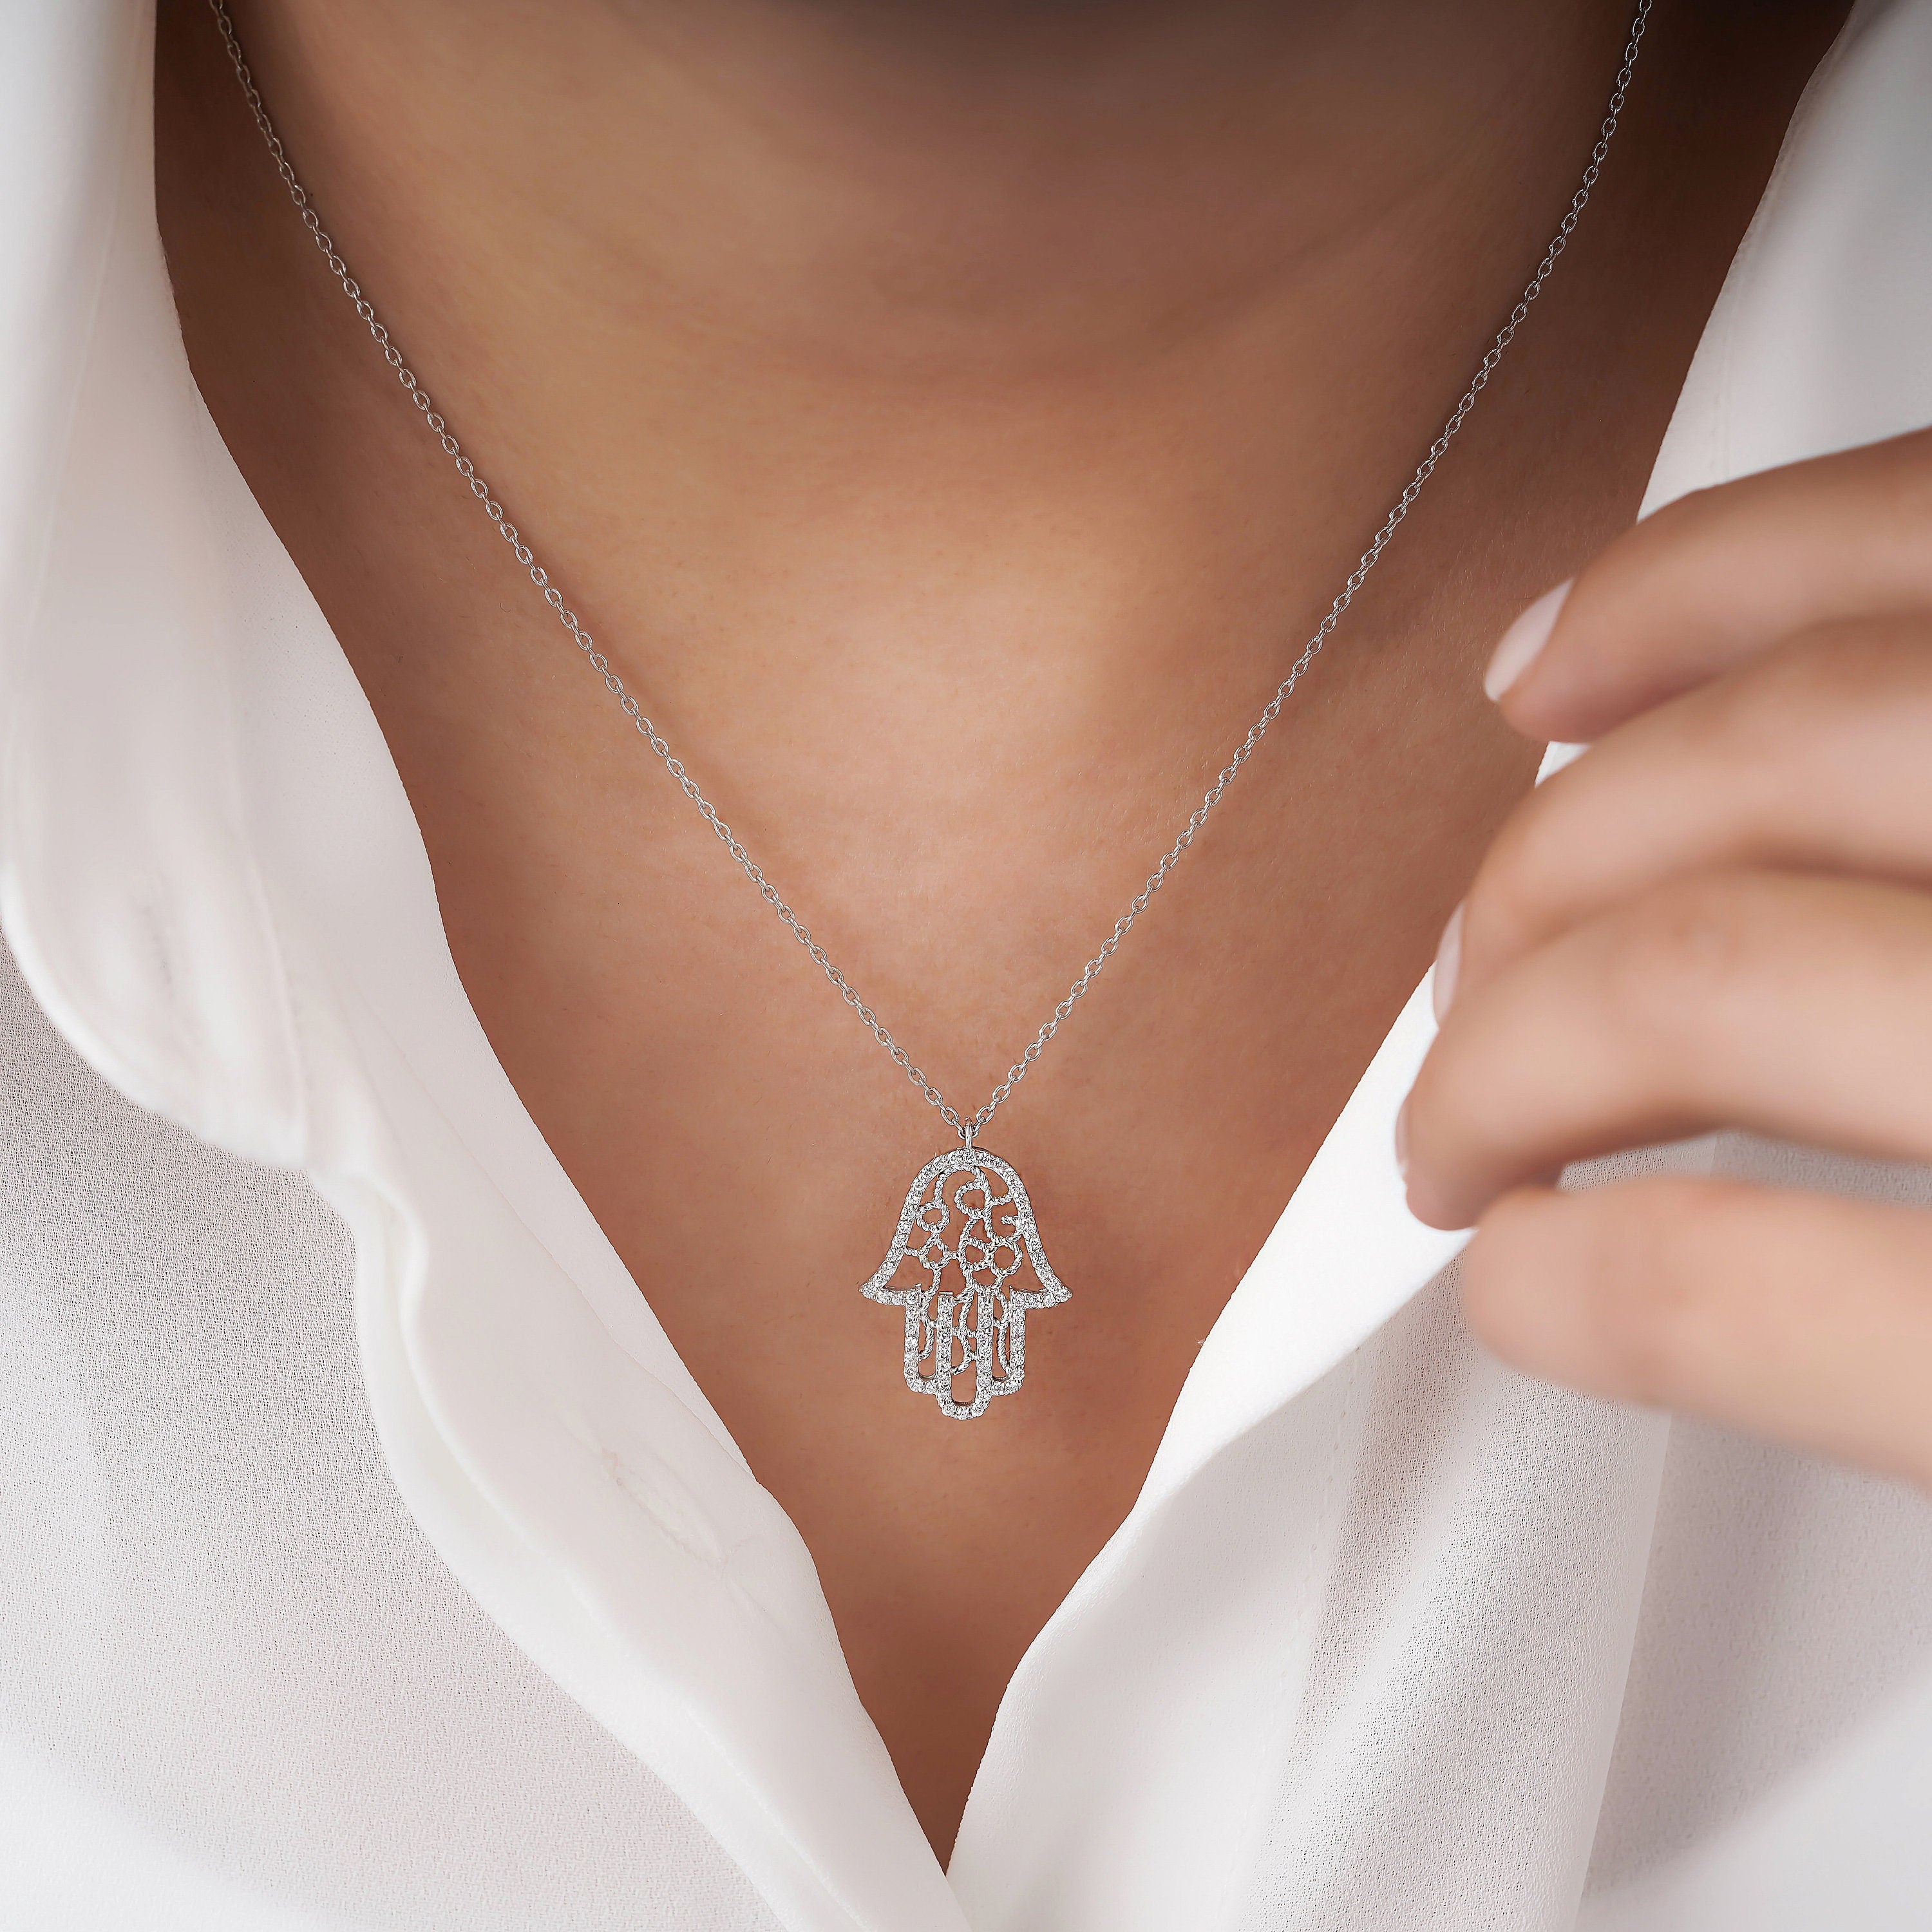 Diamond Hamsa Necklace Available in 14K and 18K Gold